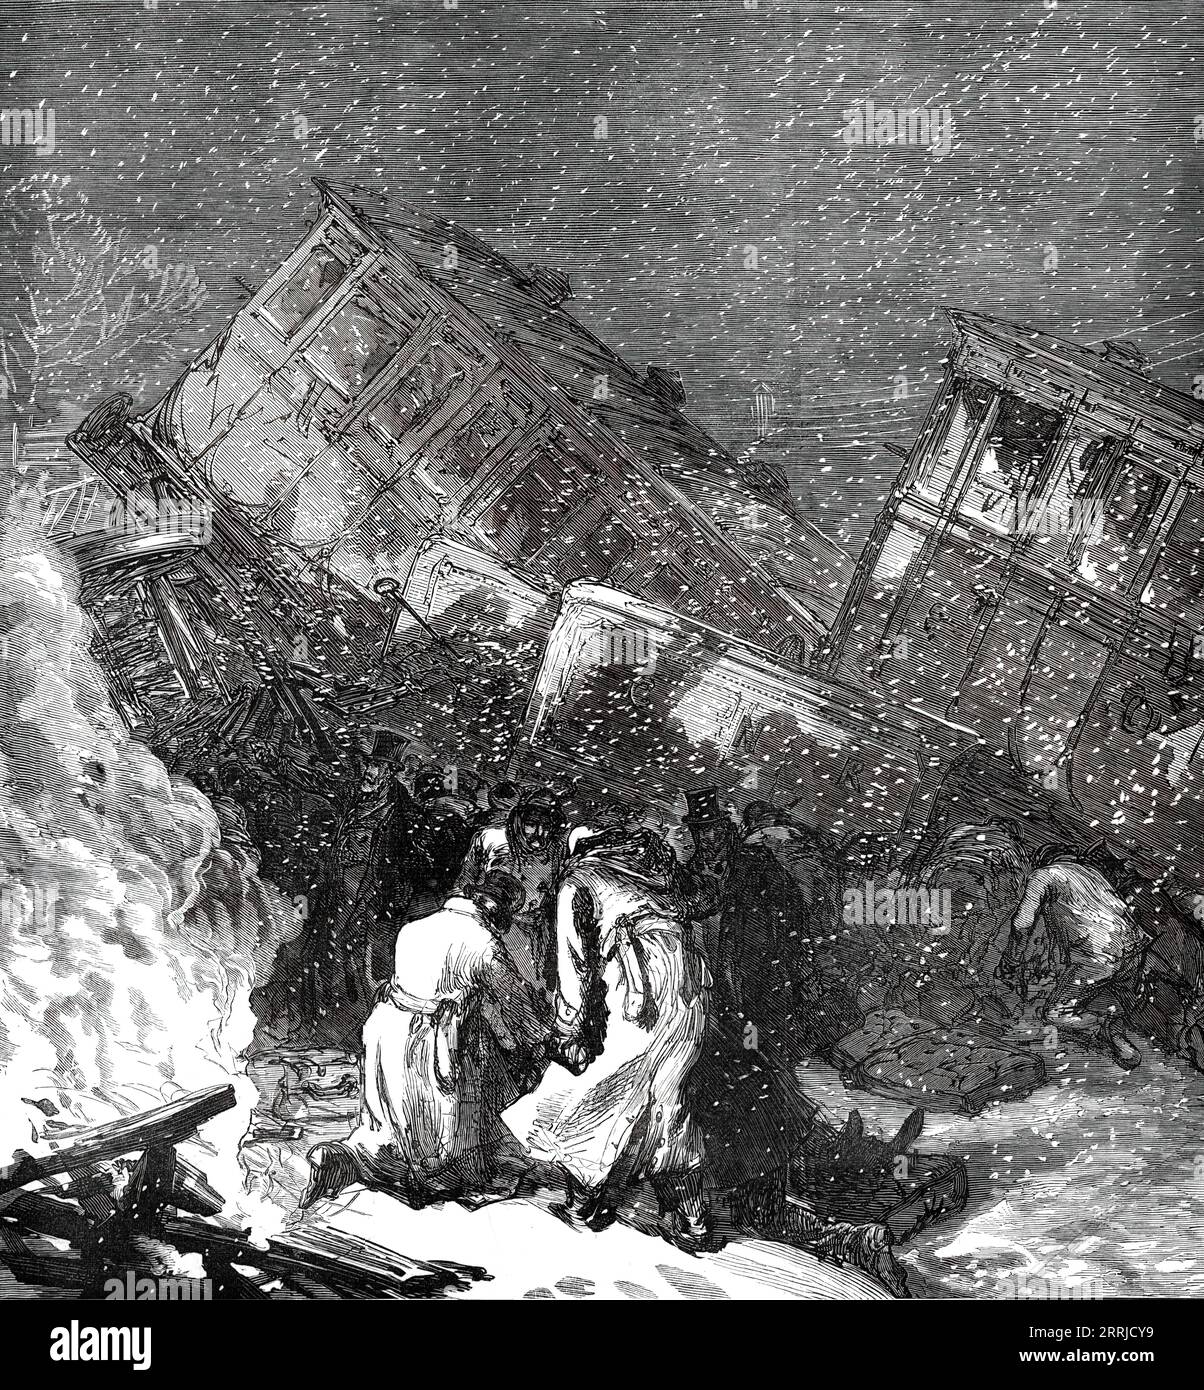 The Railway Accident at Abbotts Ripton, near Huntingdon: working parties removing the injured, from a sketch by Mr. Gompertz, a passenger, 1876. On 21 January 1876, the Edinburgh-London Special Scotch Express was involved in a collision, during a blizzard, with a coal train on the Great Northern Railway main line. A second collision occurred minutes later when an express to Leeds crashed into the wreckage obstructing the northbound line. Thirteen passengers died, and 53 passengers and 6 traincrew members were injured. Factors included signal failure, bad weather and poor visibility. Snow and i Stock Photo